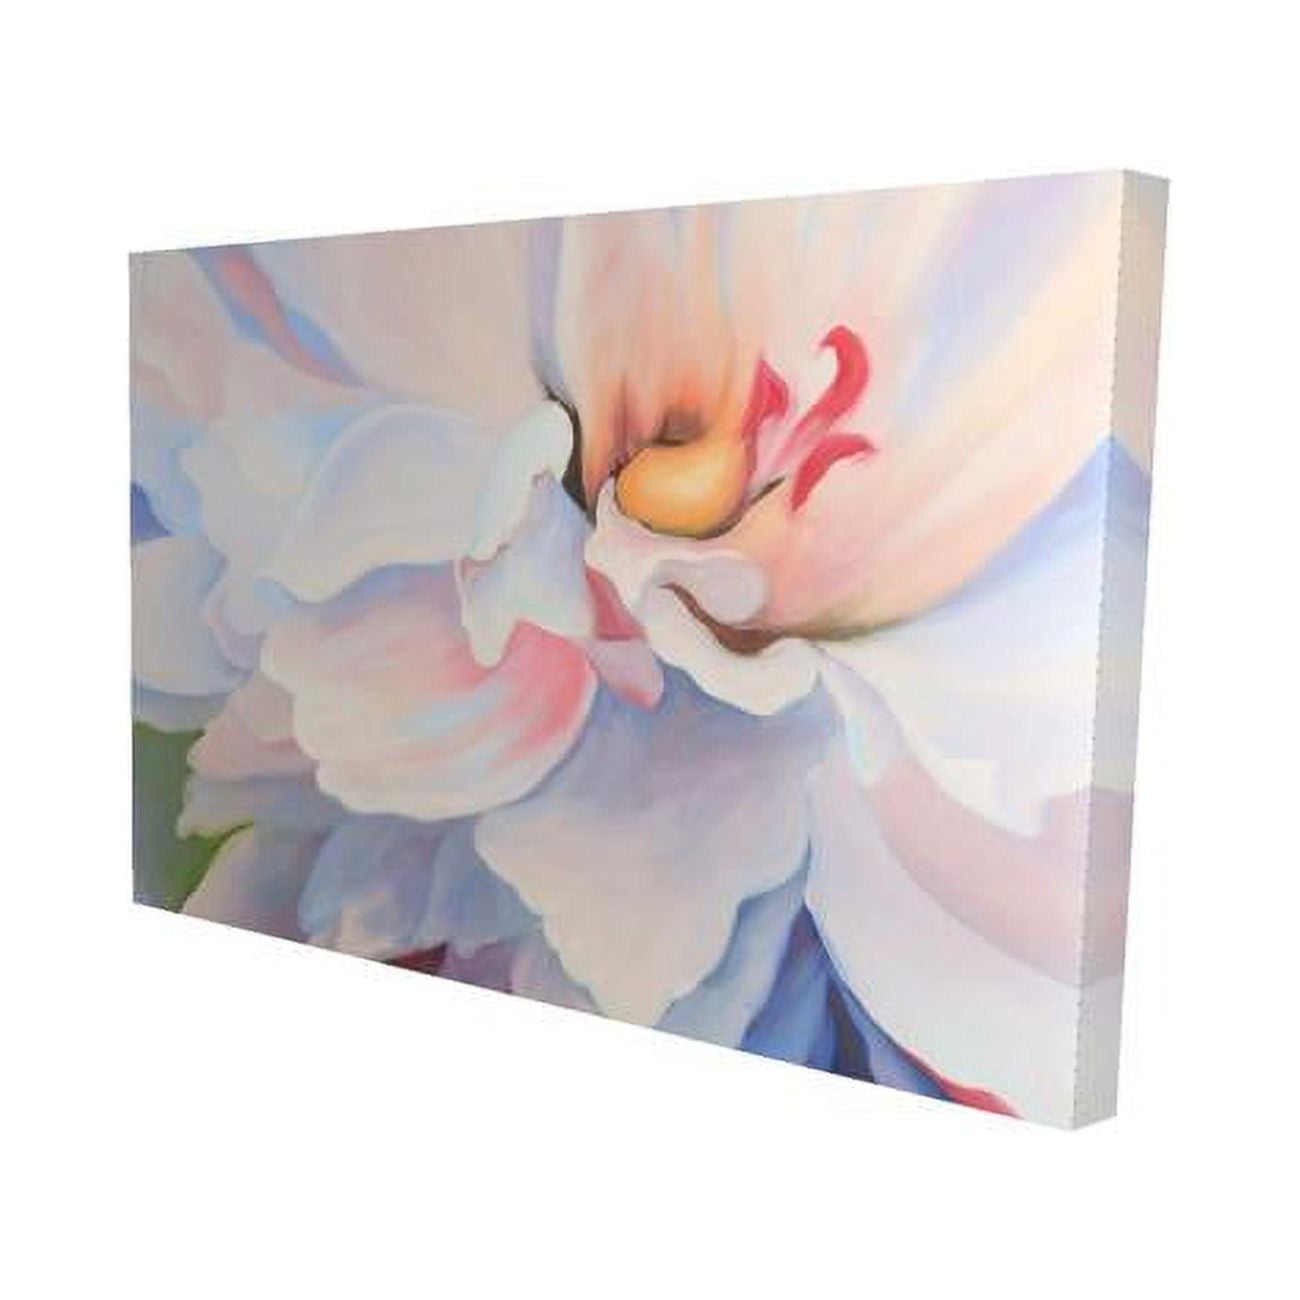 Fondo 20 x 30 in. Pastel Colored Flower-Print on Canvas